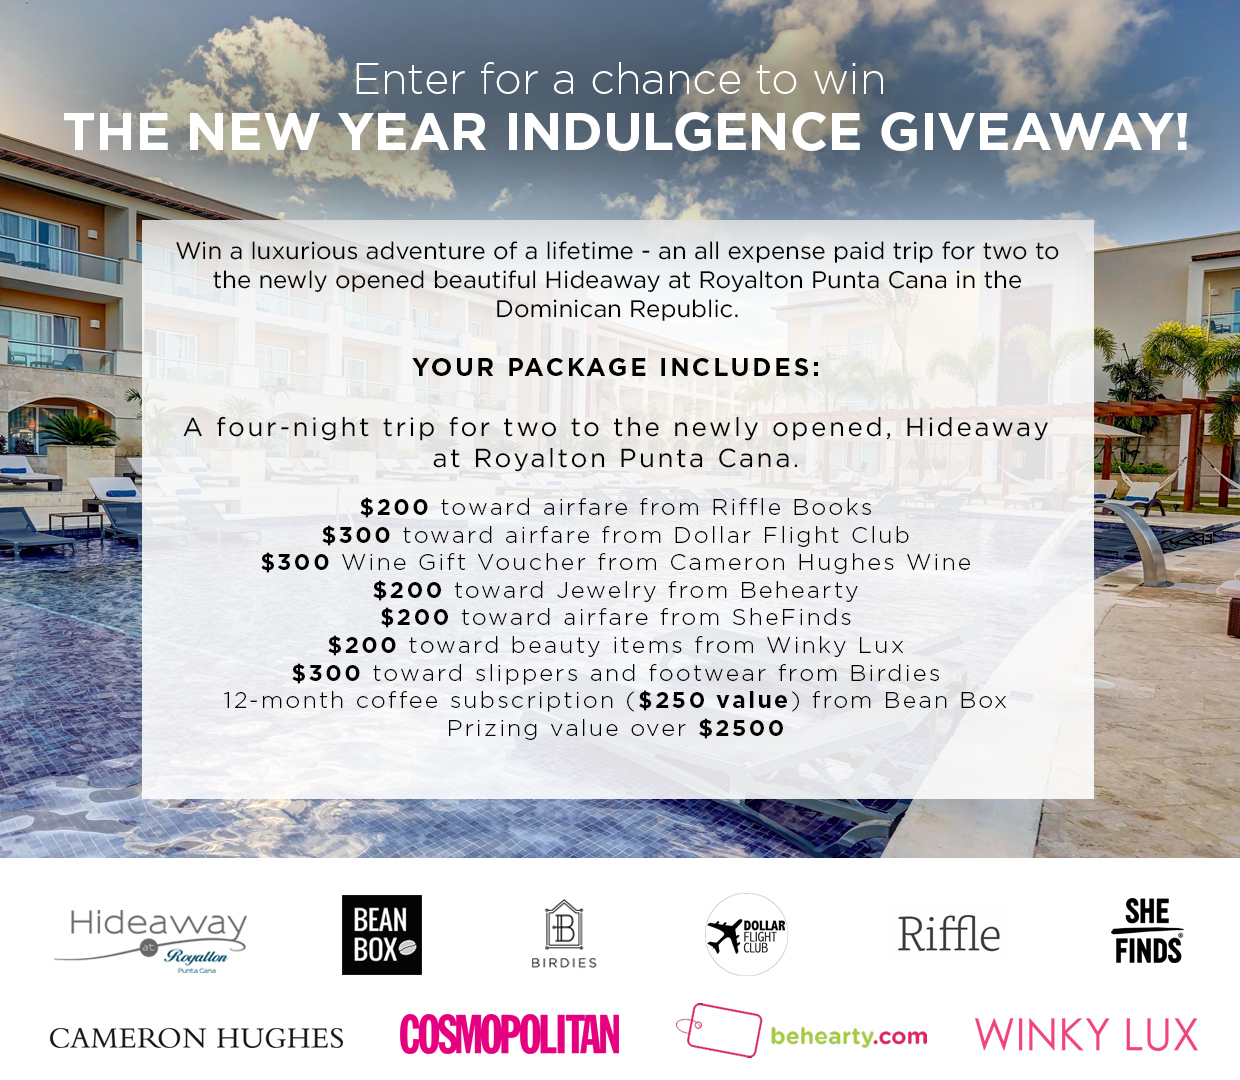 Enter for a Chance to Win the New Year Indulgence Giveaway!